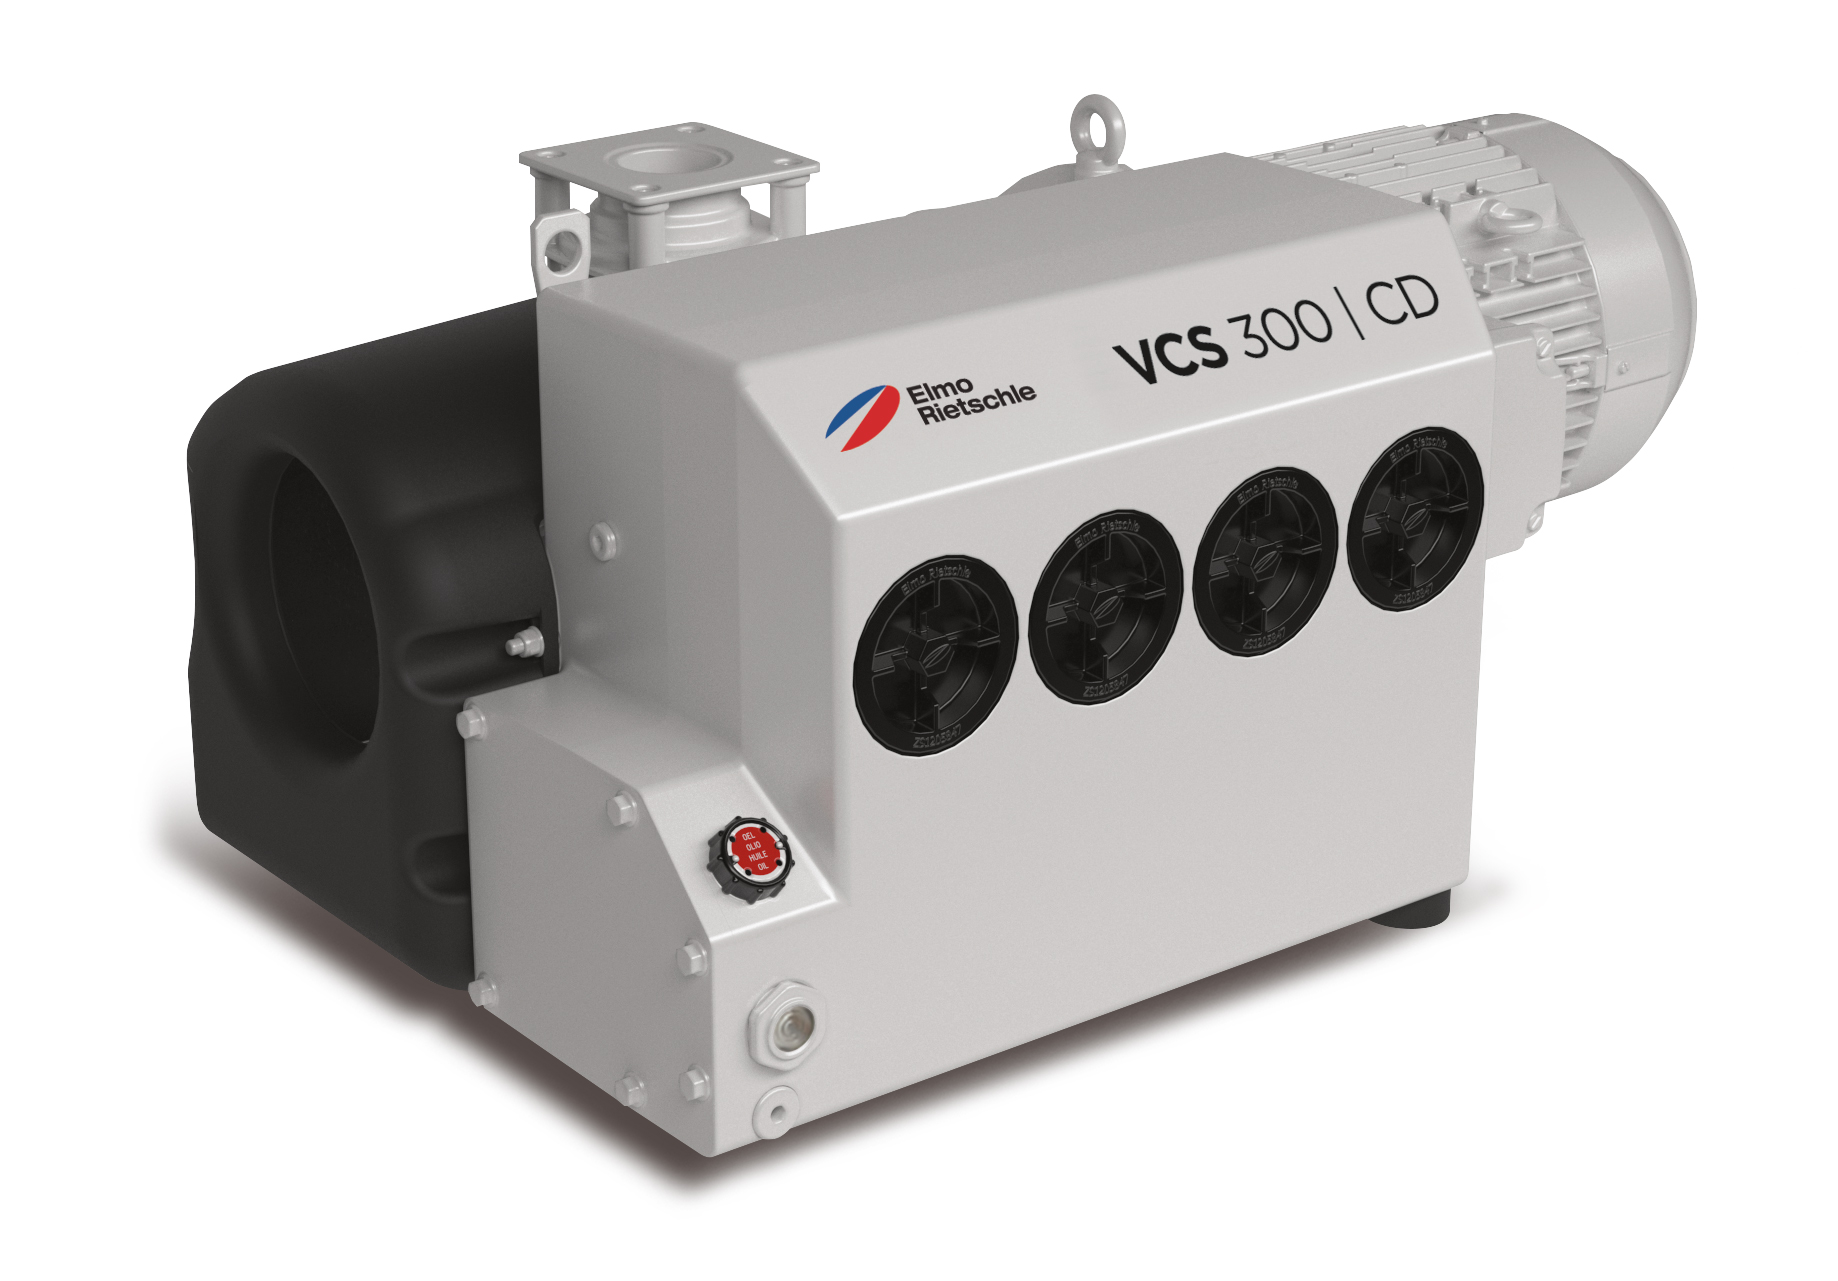 The new V-VCS has been designed to reduce maintenance needs and has fewer filter requirements than its predecessor, without any drop in the system’s oil particulate removal capabilities.